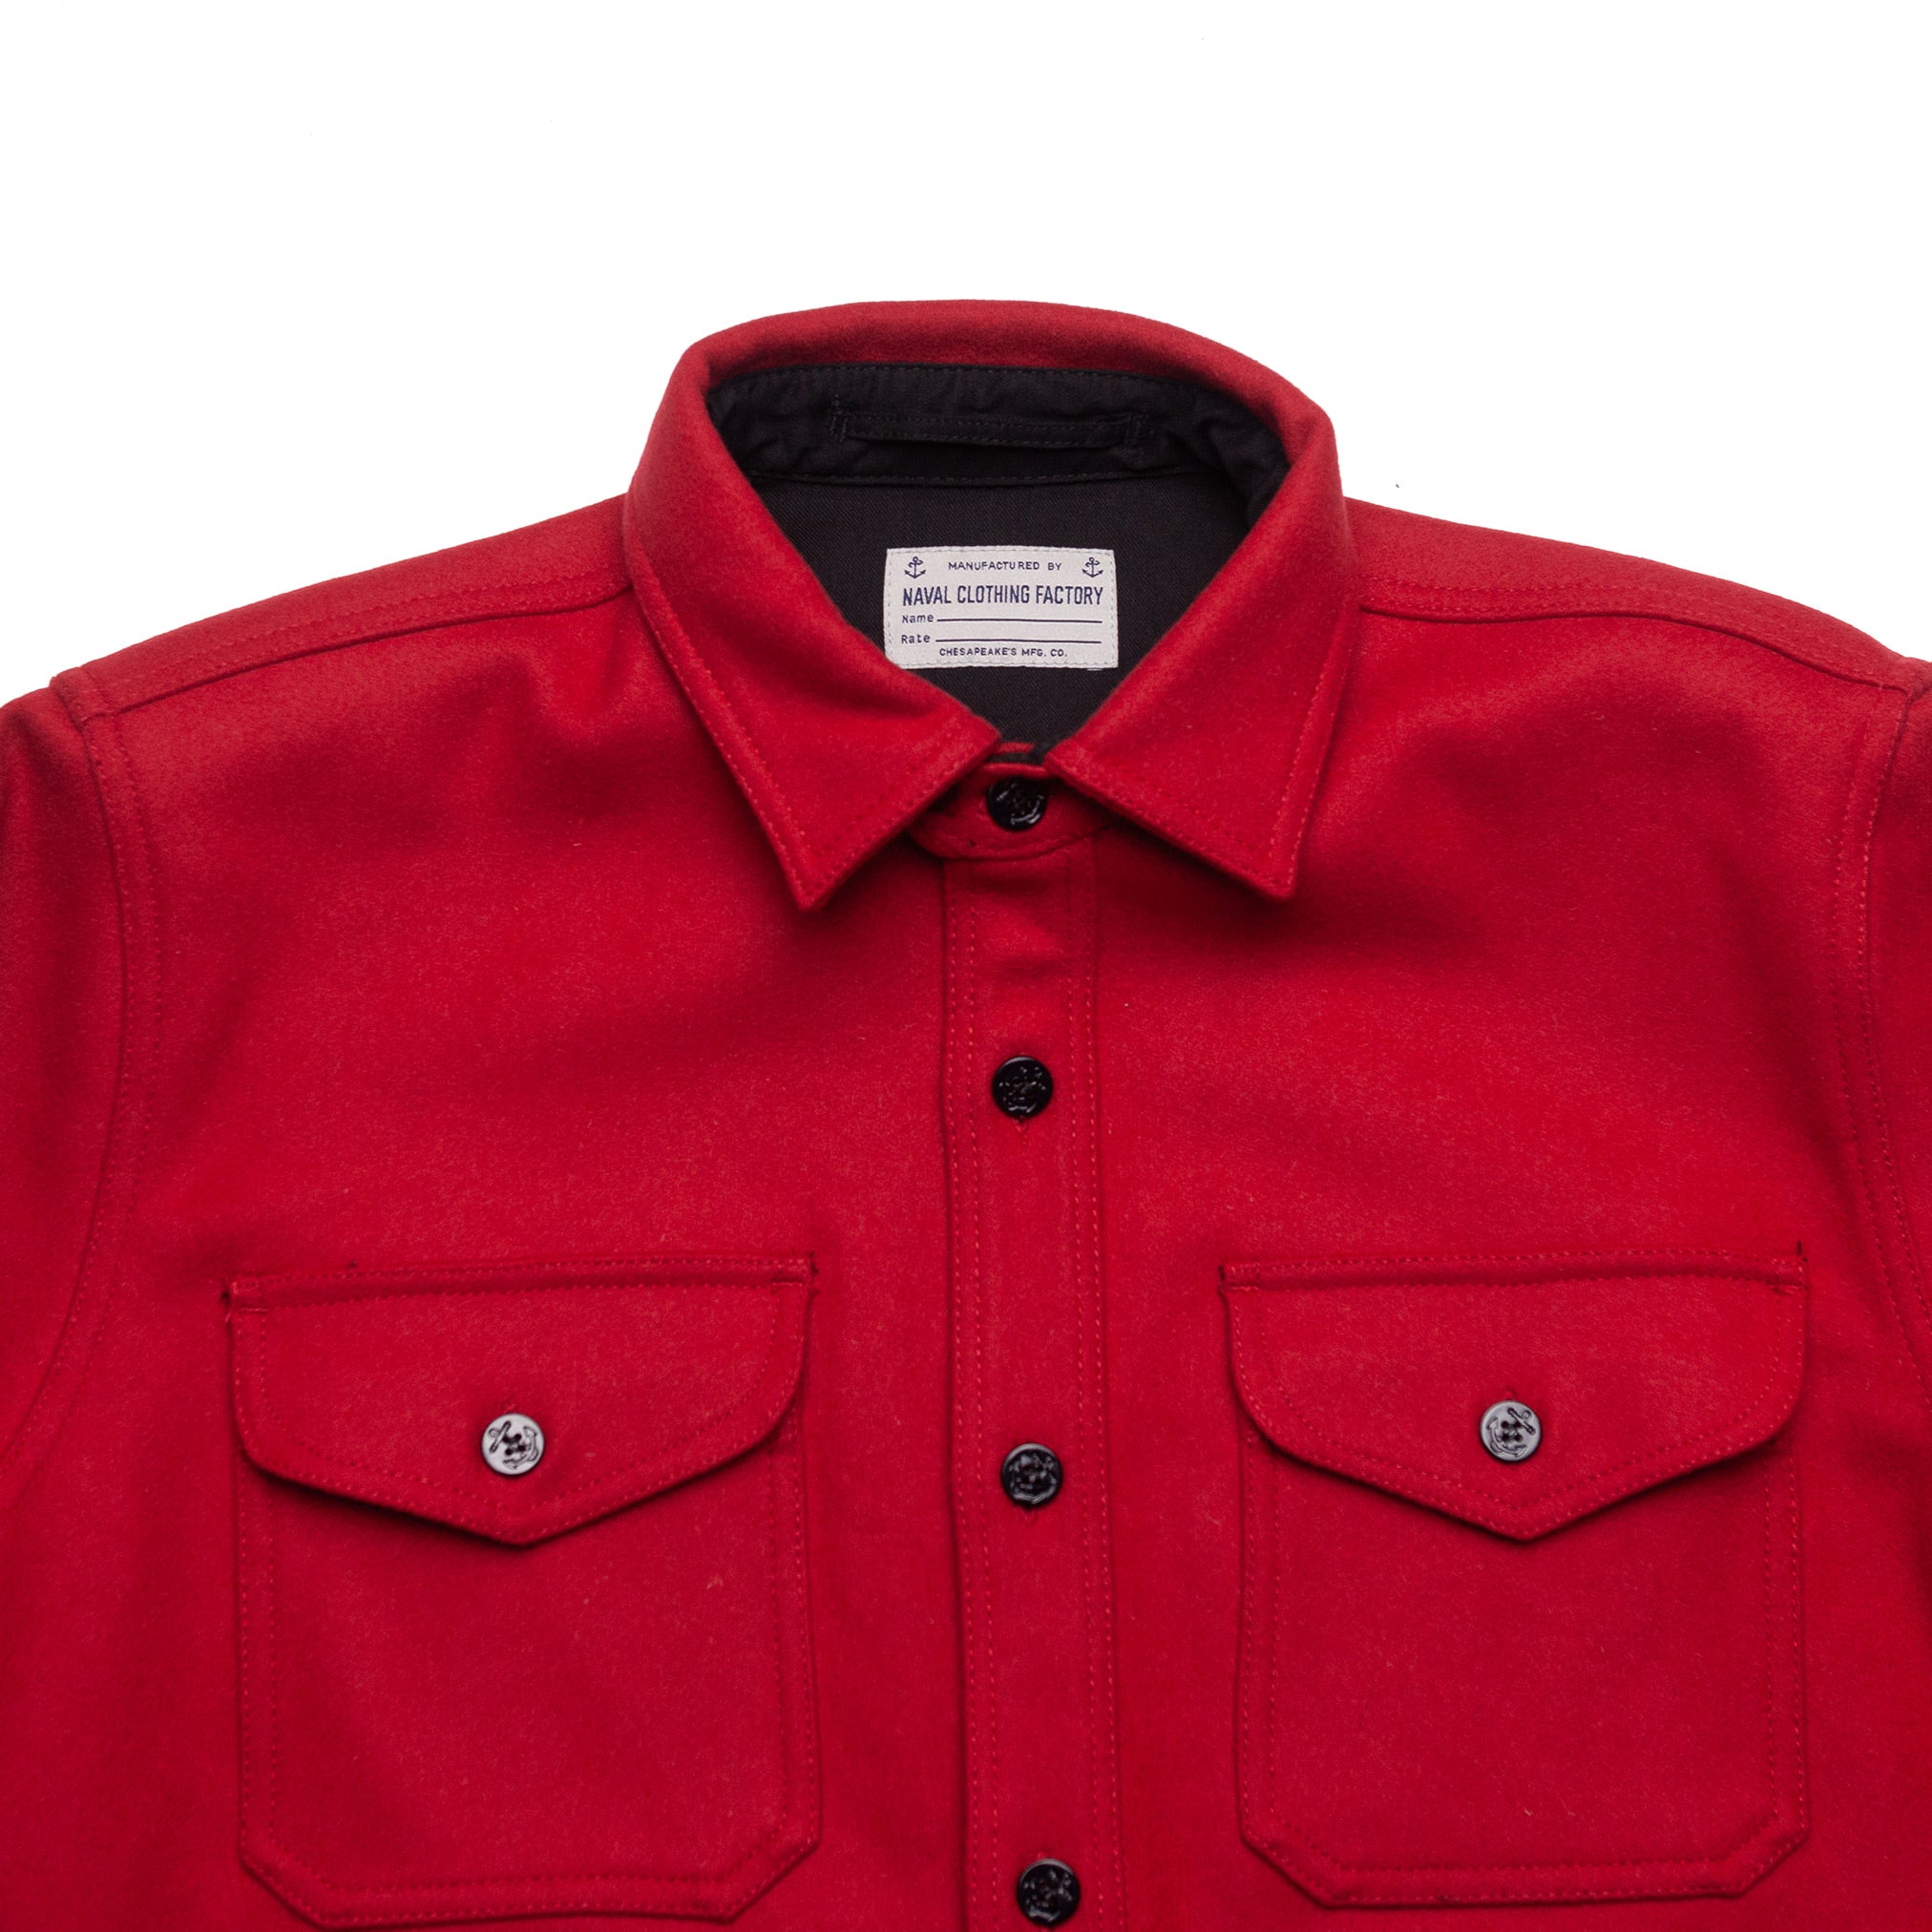 CPO Shirt in Red